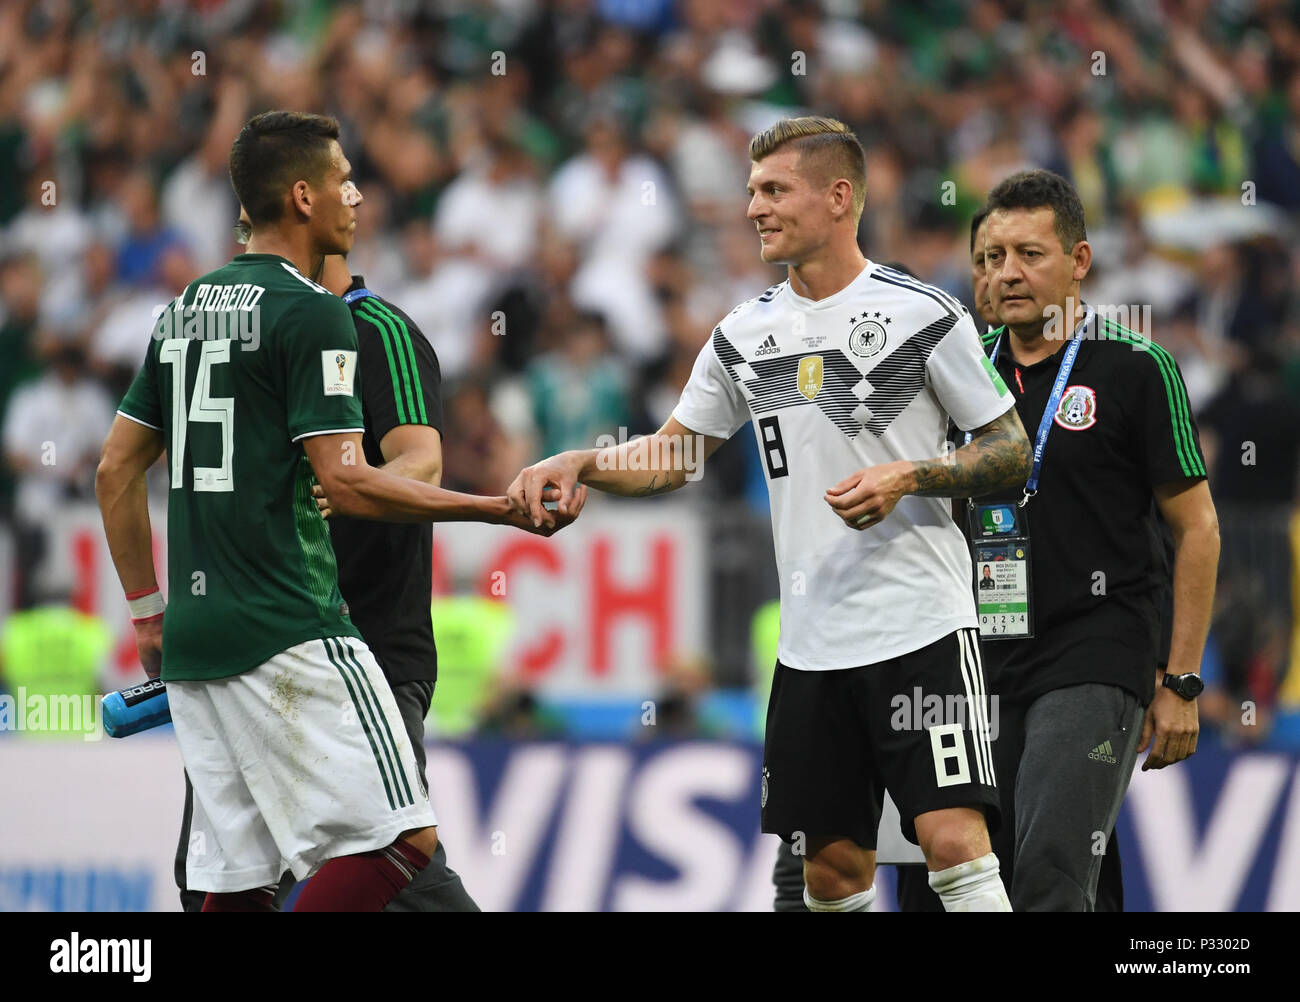 Moscow, Russia, 17 June 2018, Soccer, FIFA World Cup, Group F, Matchday 1 of 3, Germany vs Mexico at the Luzhniki Stadium: Germany's Toni Kroos shakes hands with Hector Moreno (L) of Mexico. The German national team lost the opening game against Mexico by 0-1. Photo: Federico Gambarini/dpa Credit: dpa picture alliance/Alamy Live News Stock Photo